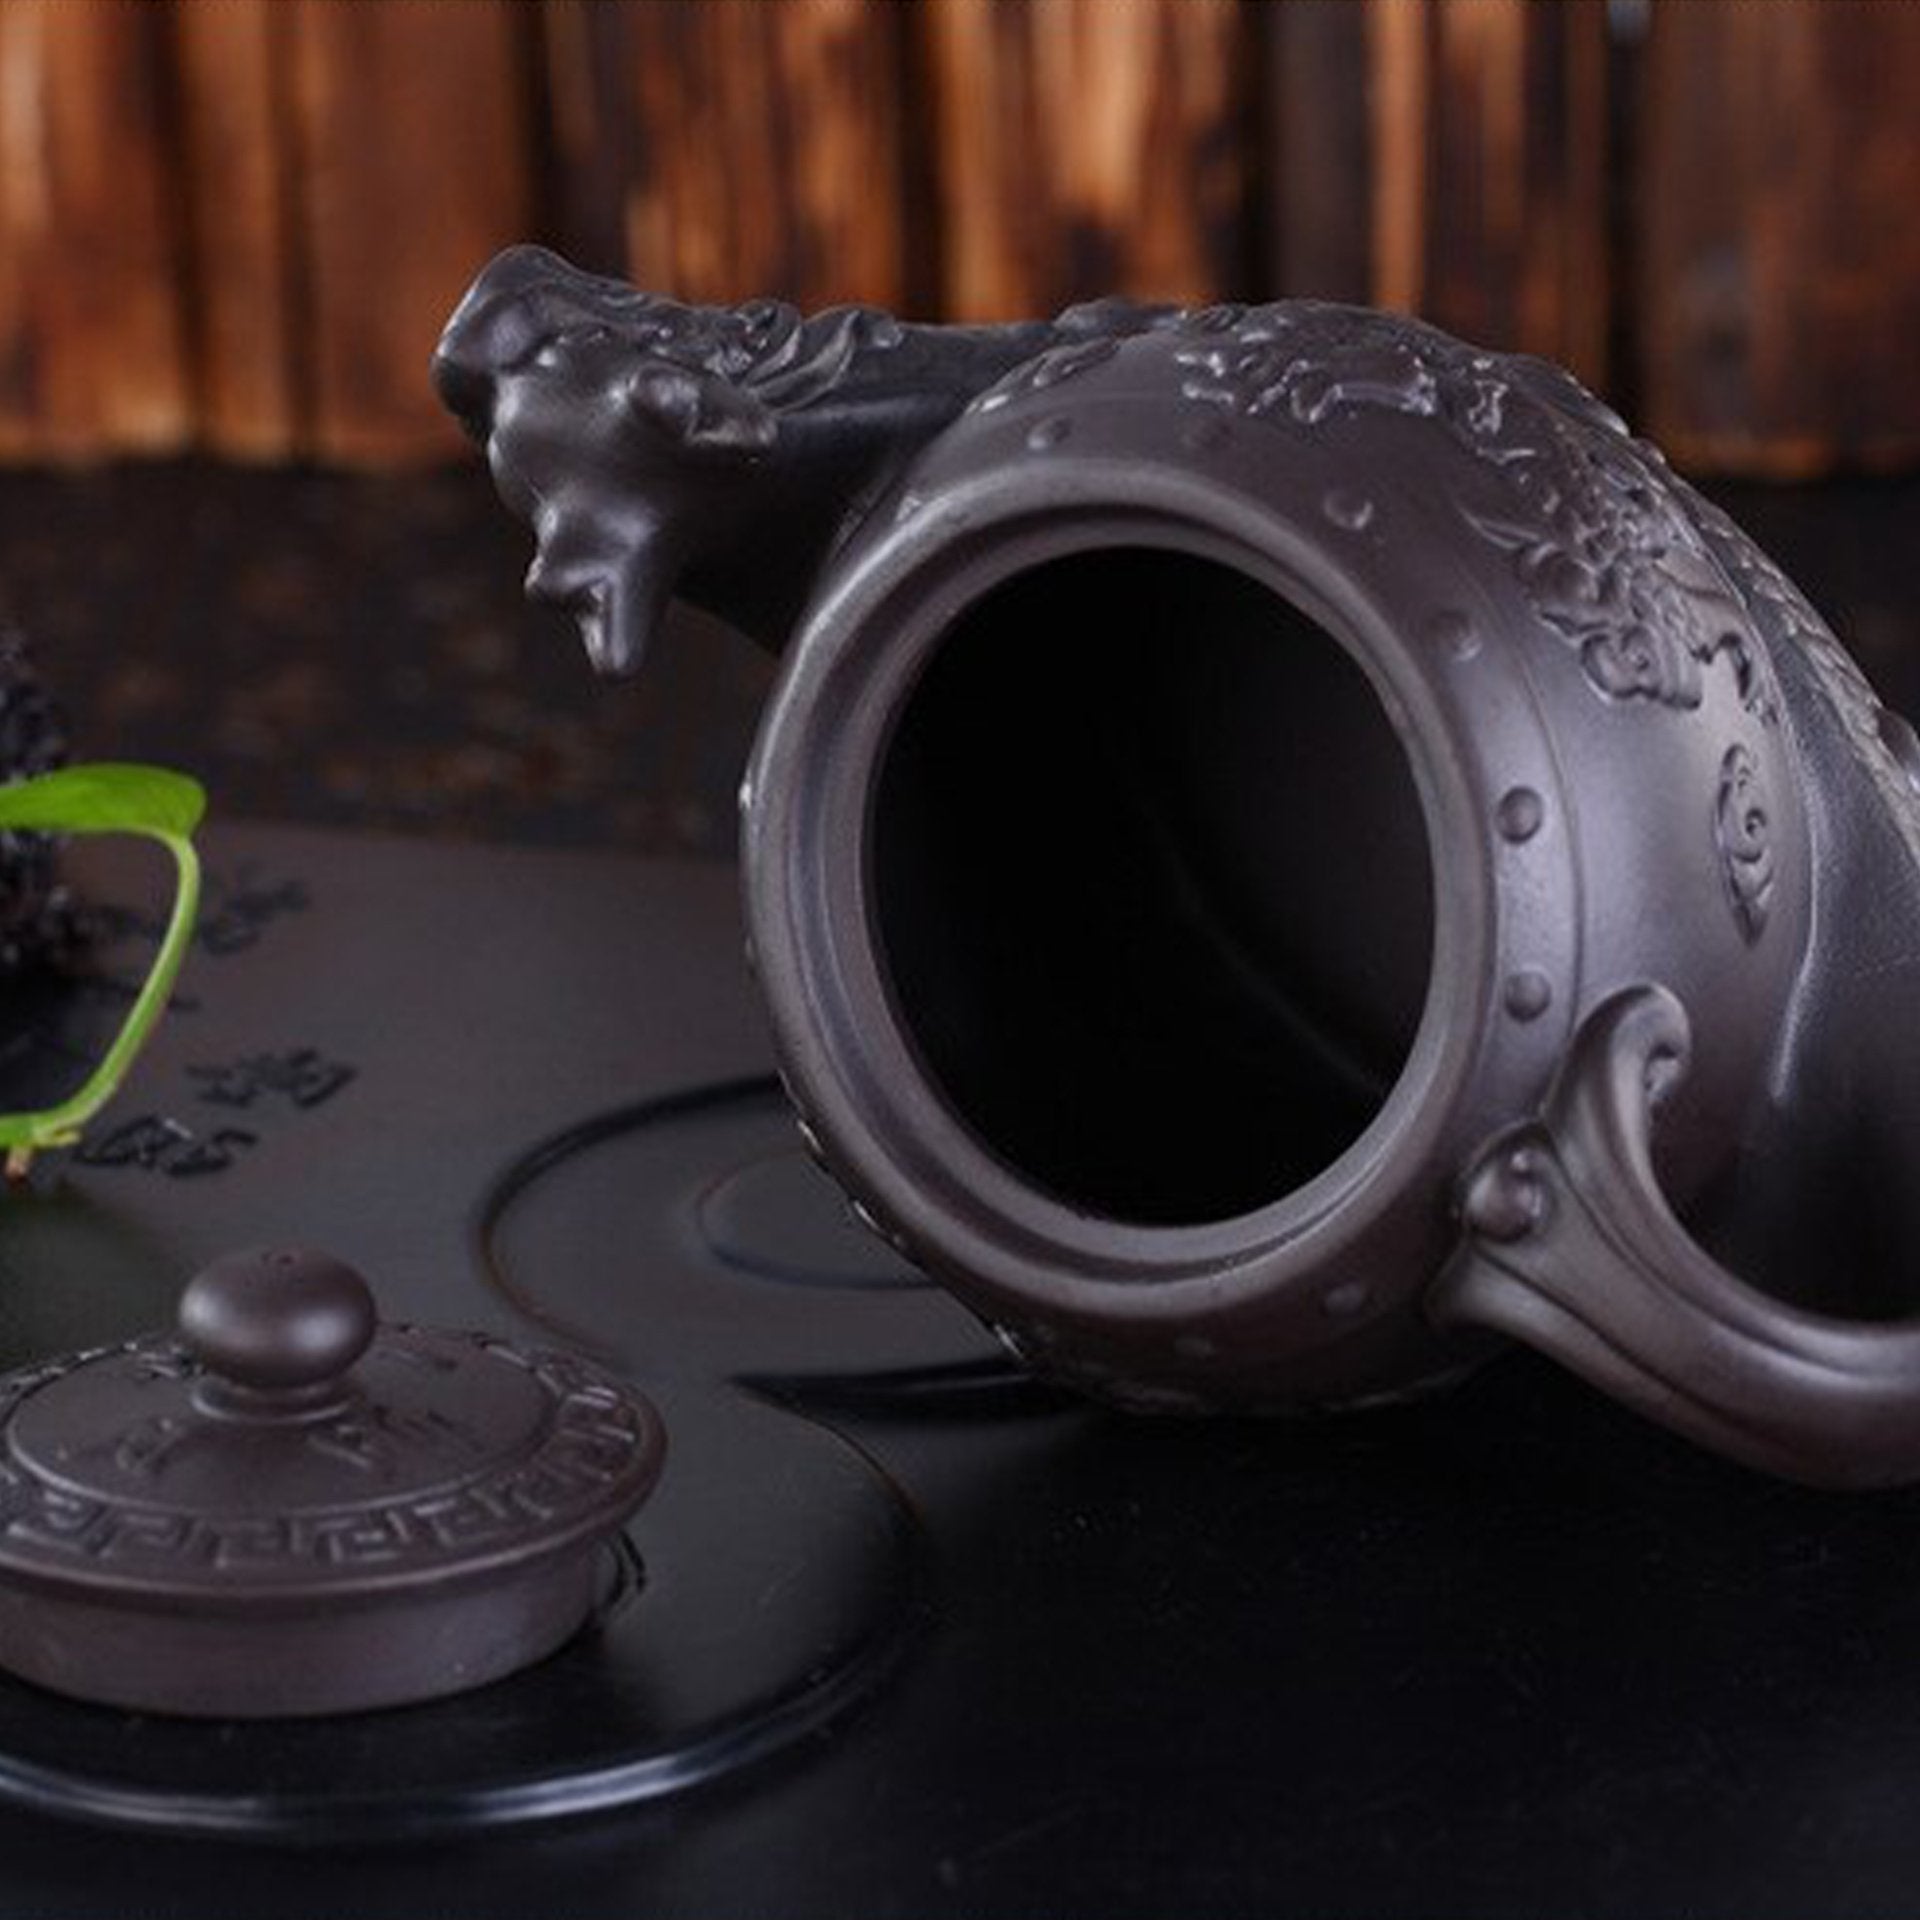 Open dark clay teapot with dragon design and lid off, showing the interior.